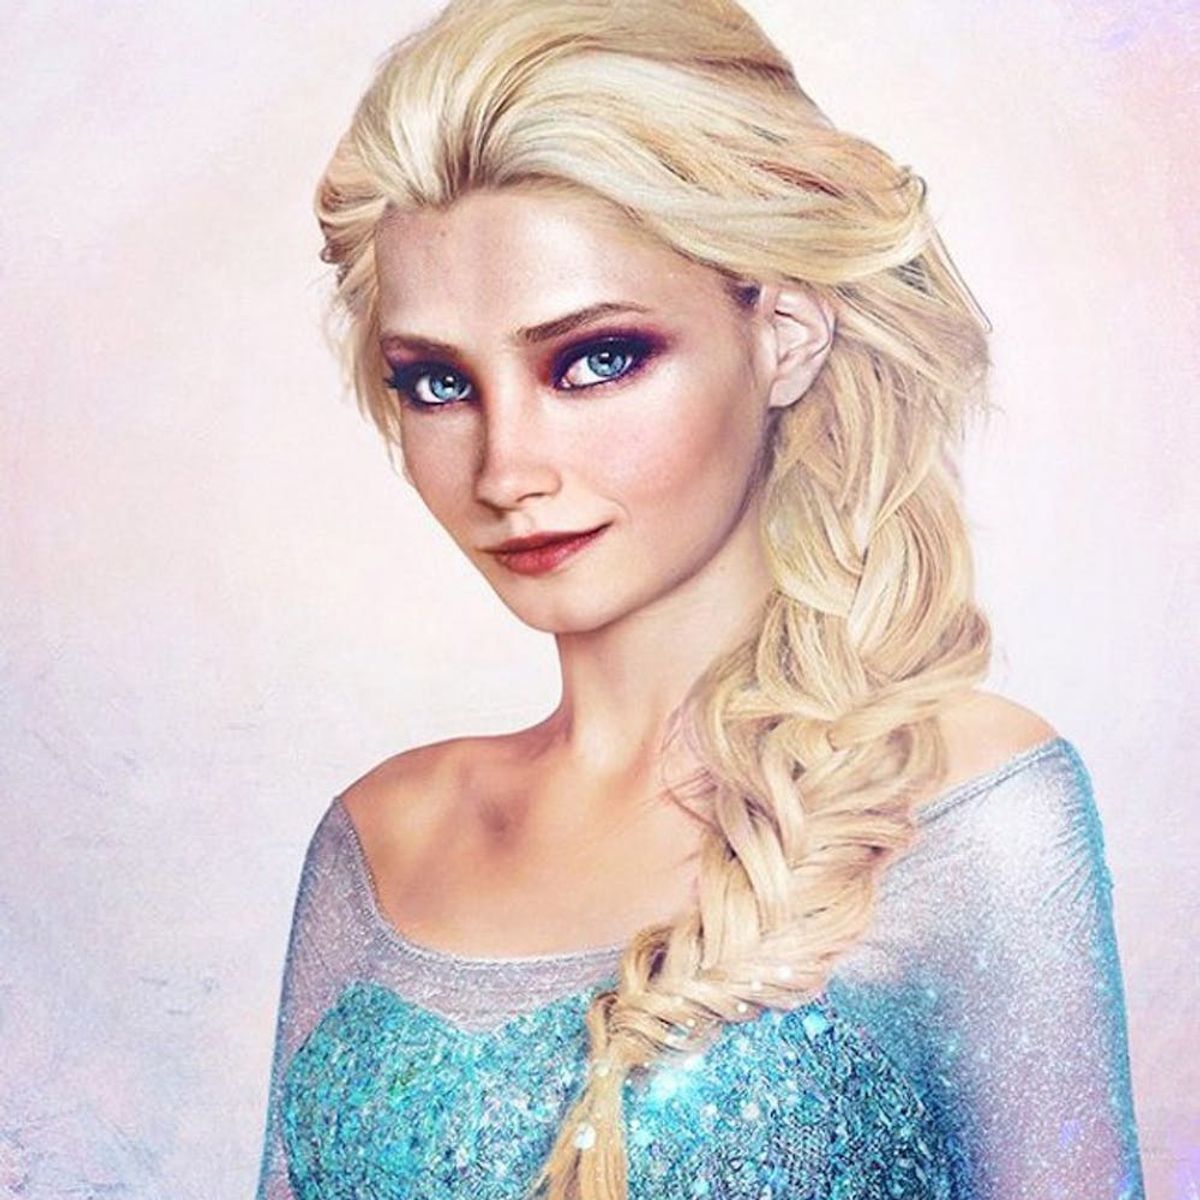 This Is What Frozen’s Anna and Elsa Would Look like IRL